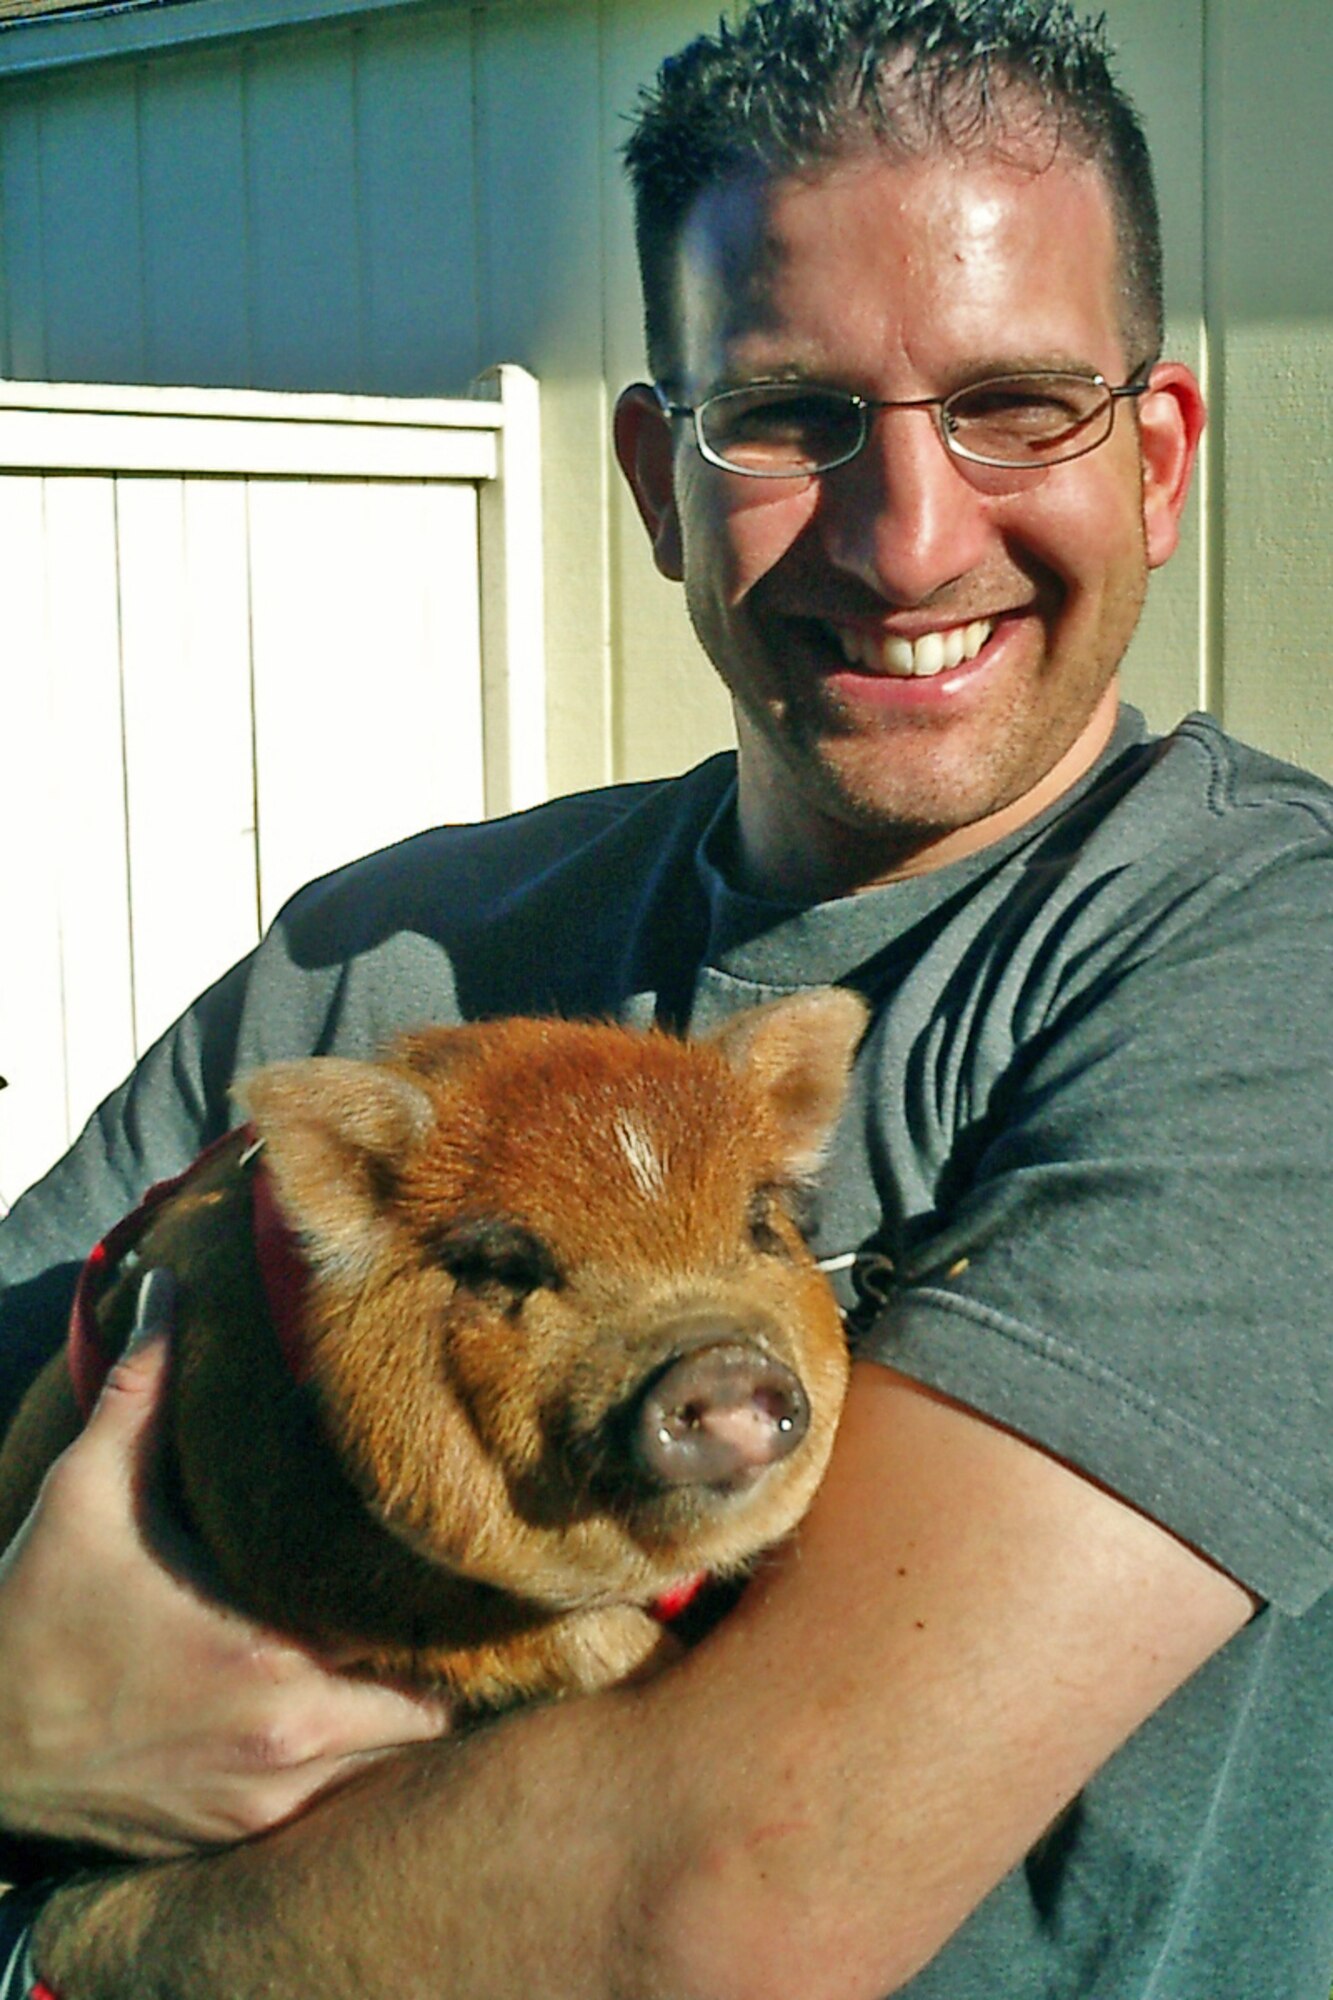 1st Lt. Paul Hall, Medical Readiness Deputy Flight Commander at the 446th Aeromedical Staging Squadron, poses with his pet, Barbie Q, a pot belly pig, at his home in Lacey, Wash. Hall and his wife, Tiffani, own two pot belly pigs, three rats, and several fish. (Courtesy photo)